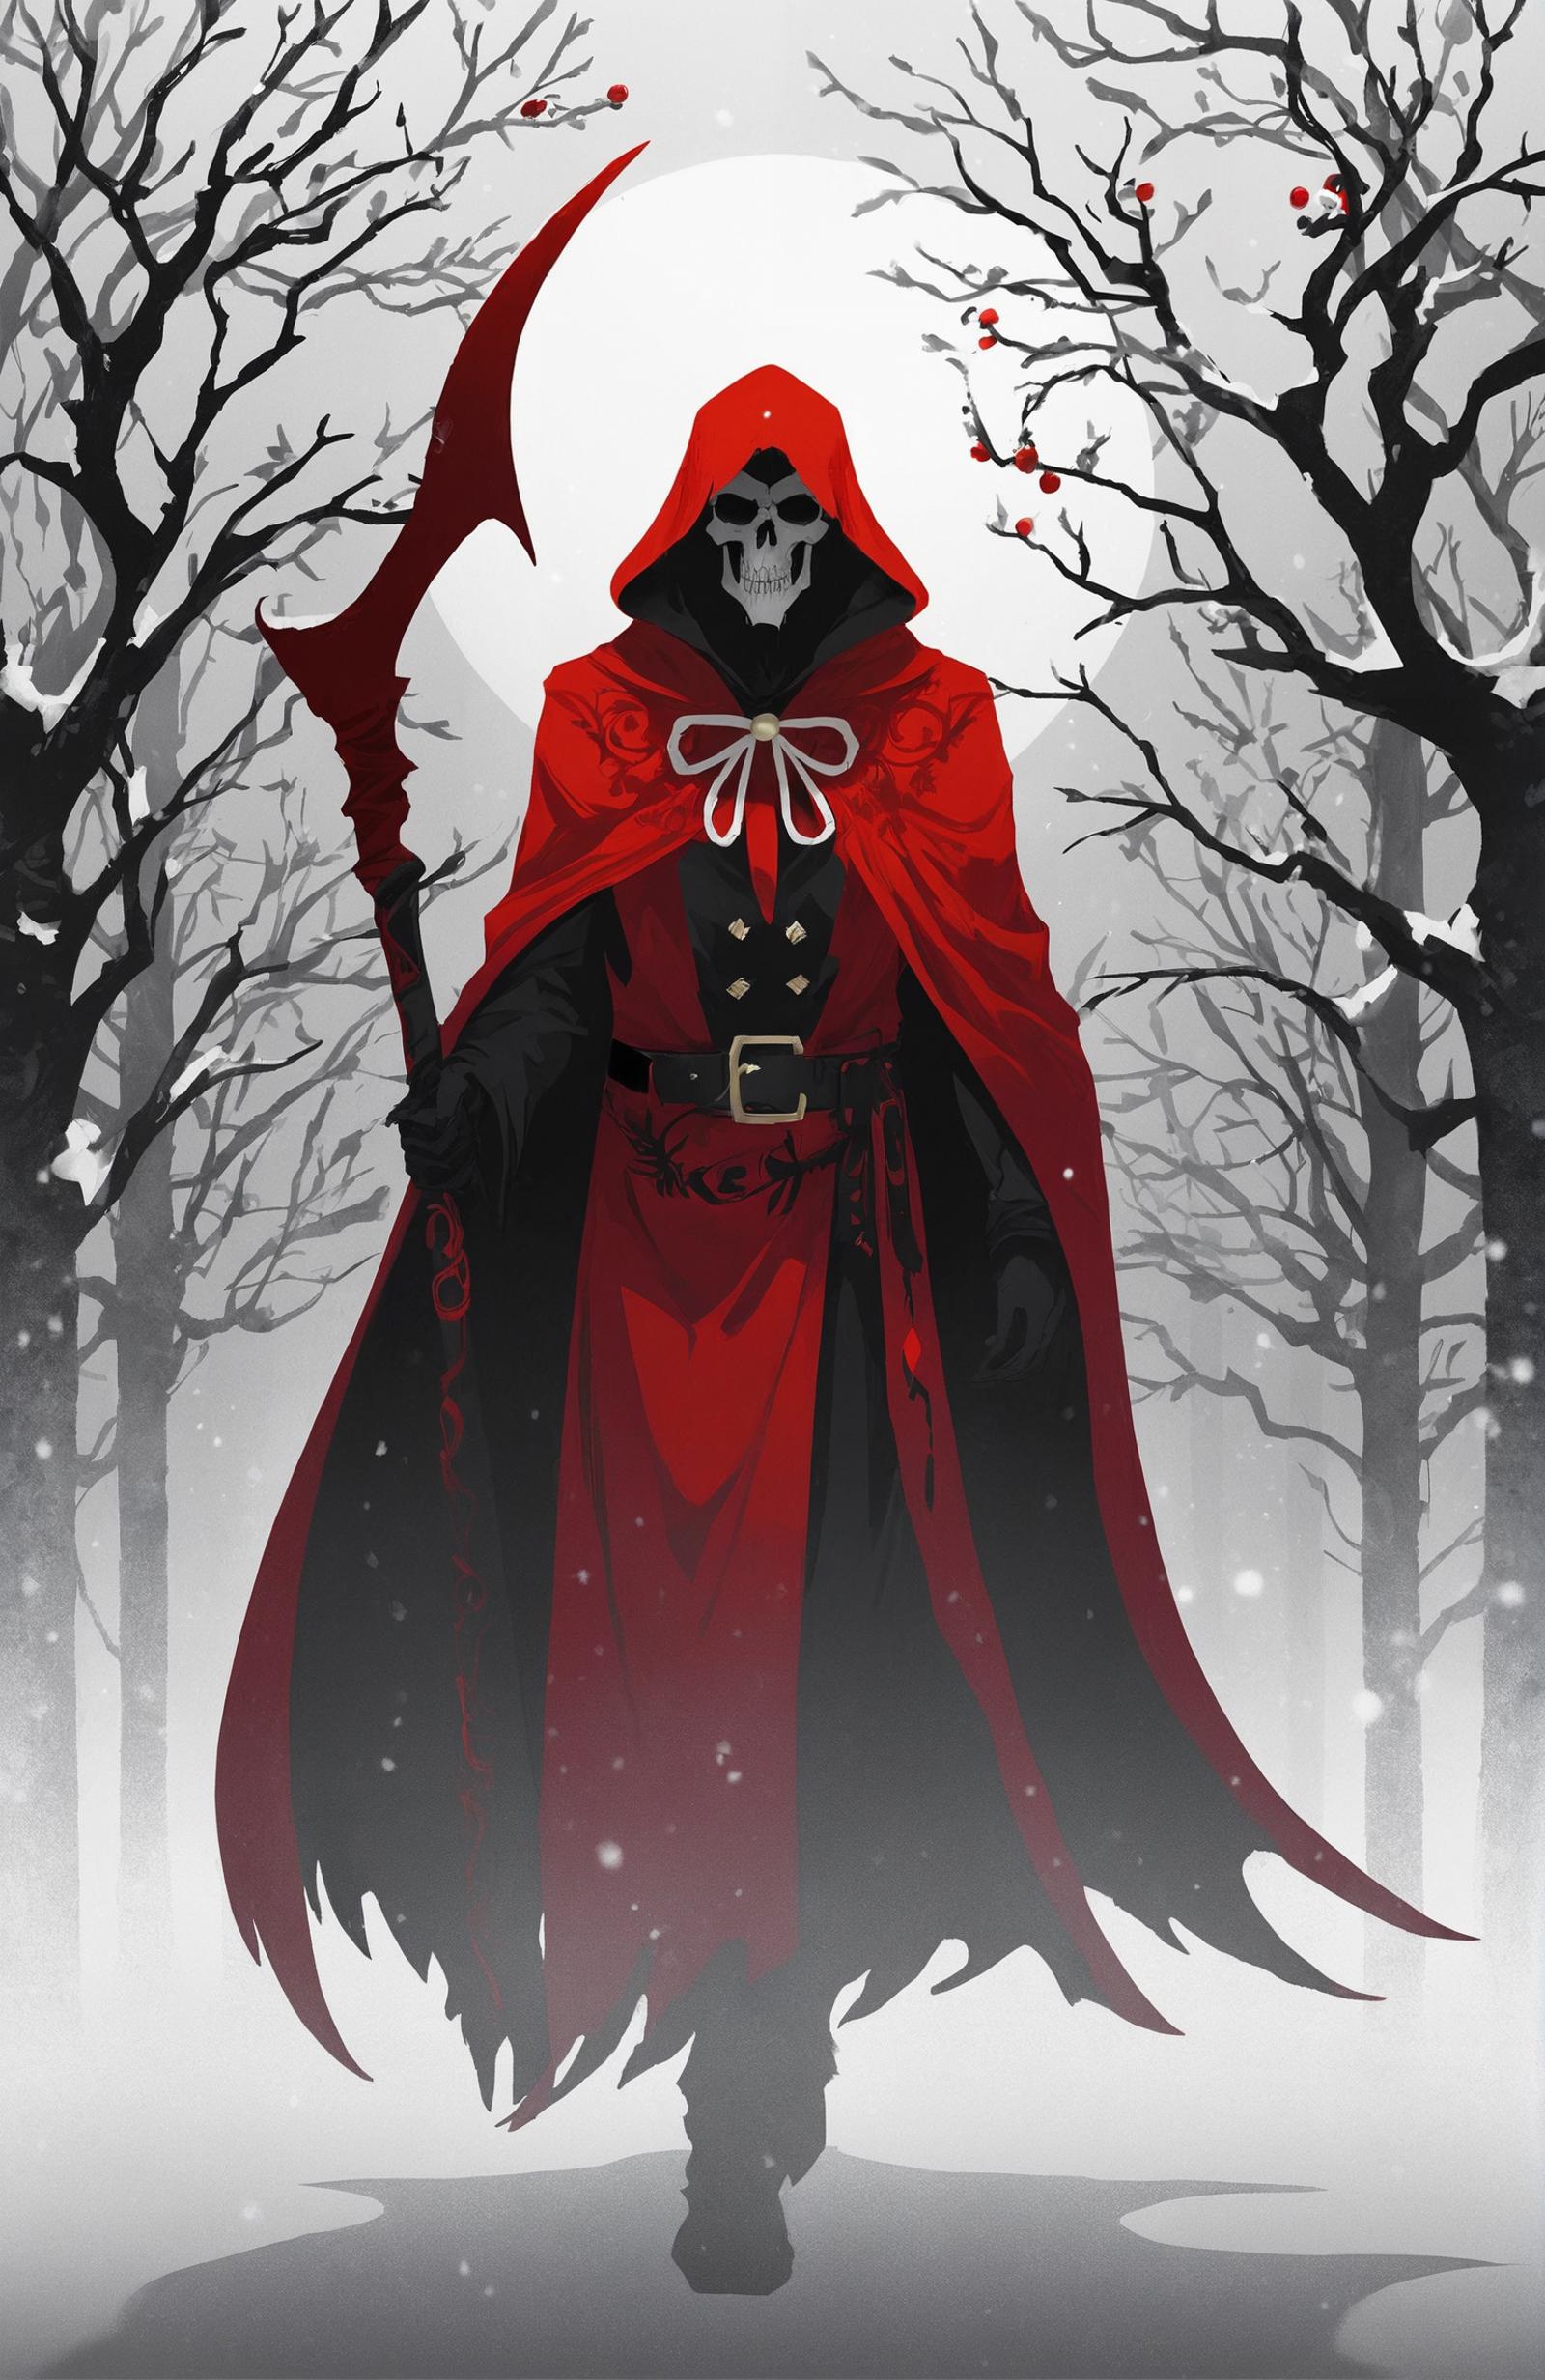 A cartoon drawing of a skeleton wearing a red robe and holding a scythe.